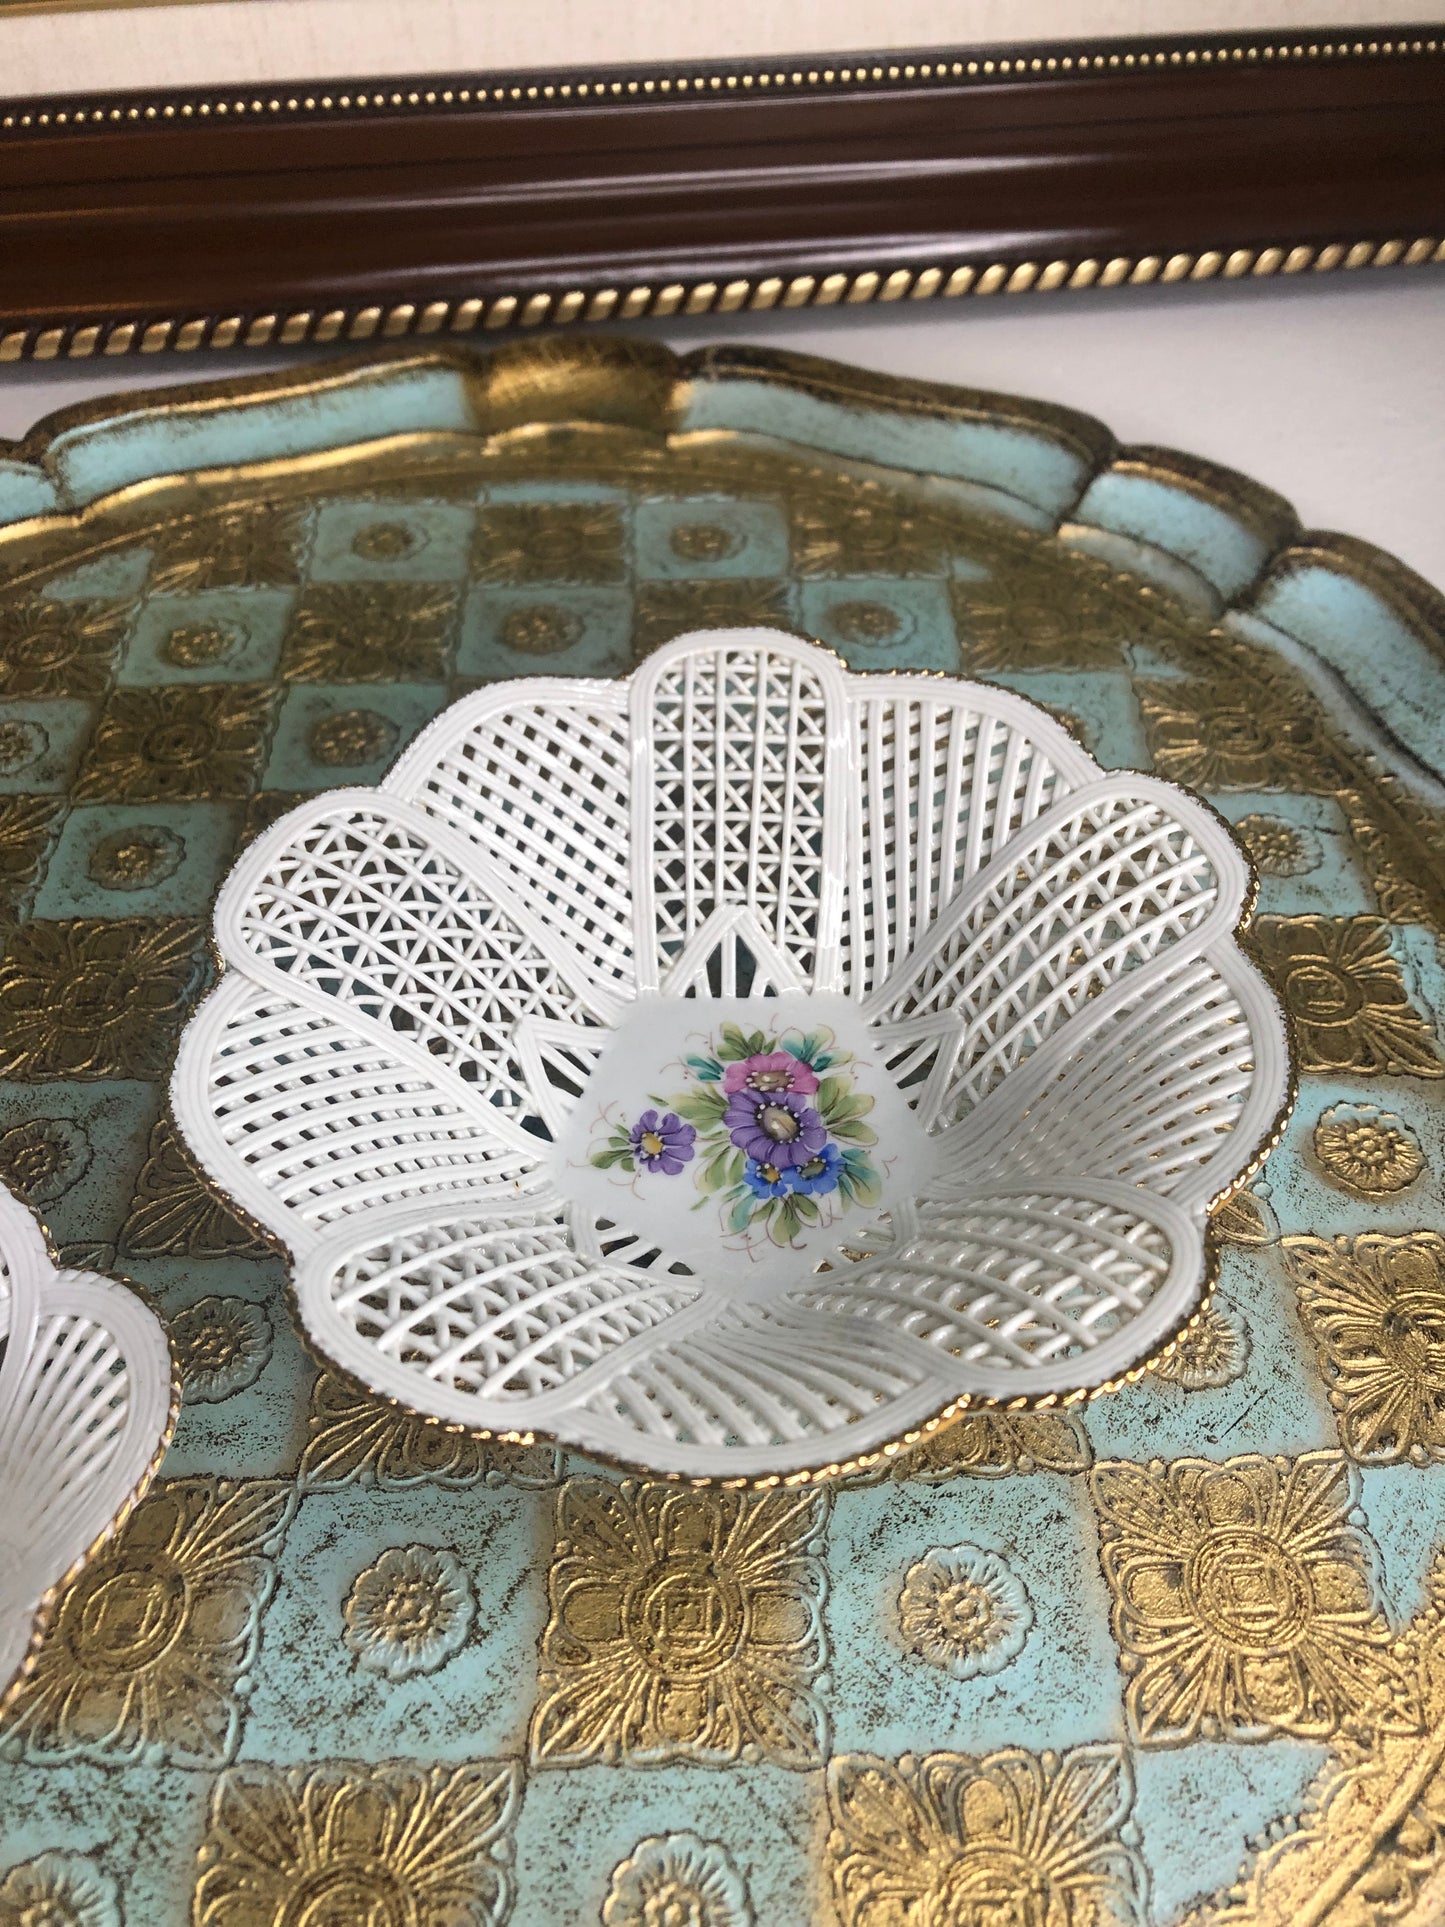 Vintage pair of Reticulated woven lace floral trinket dishes- Excellent condition!